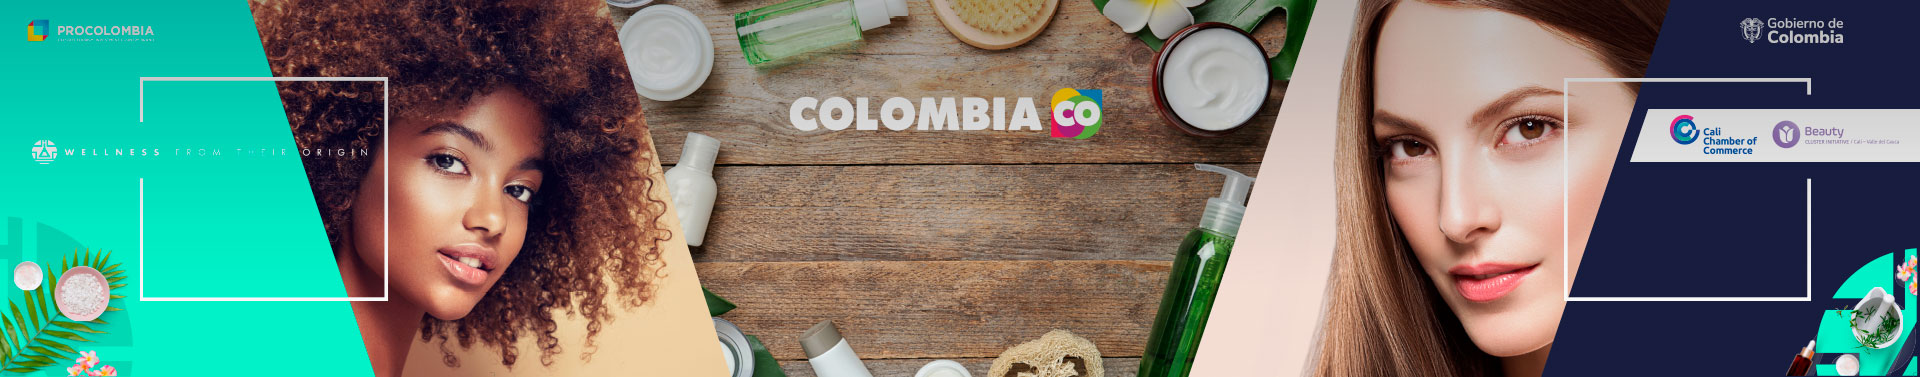 Colombia marca país Beauty Cluster